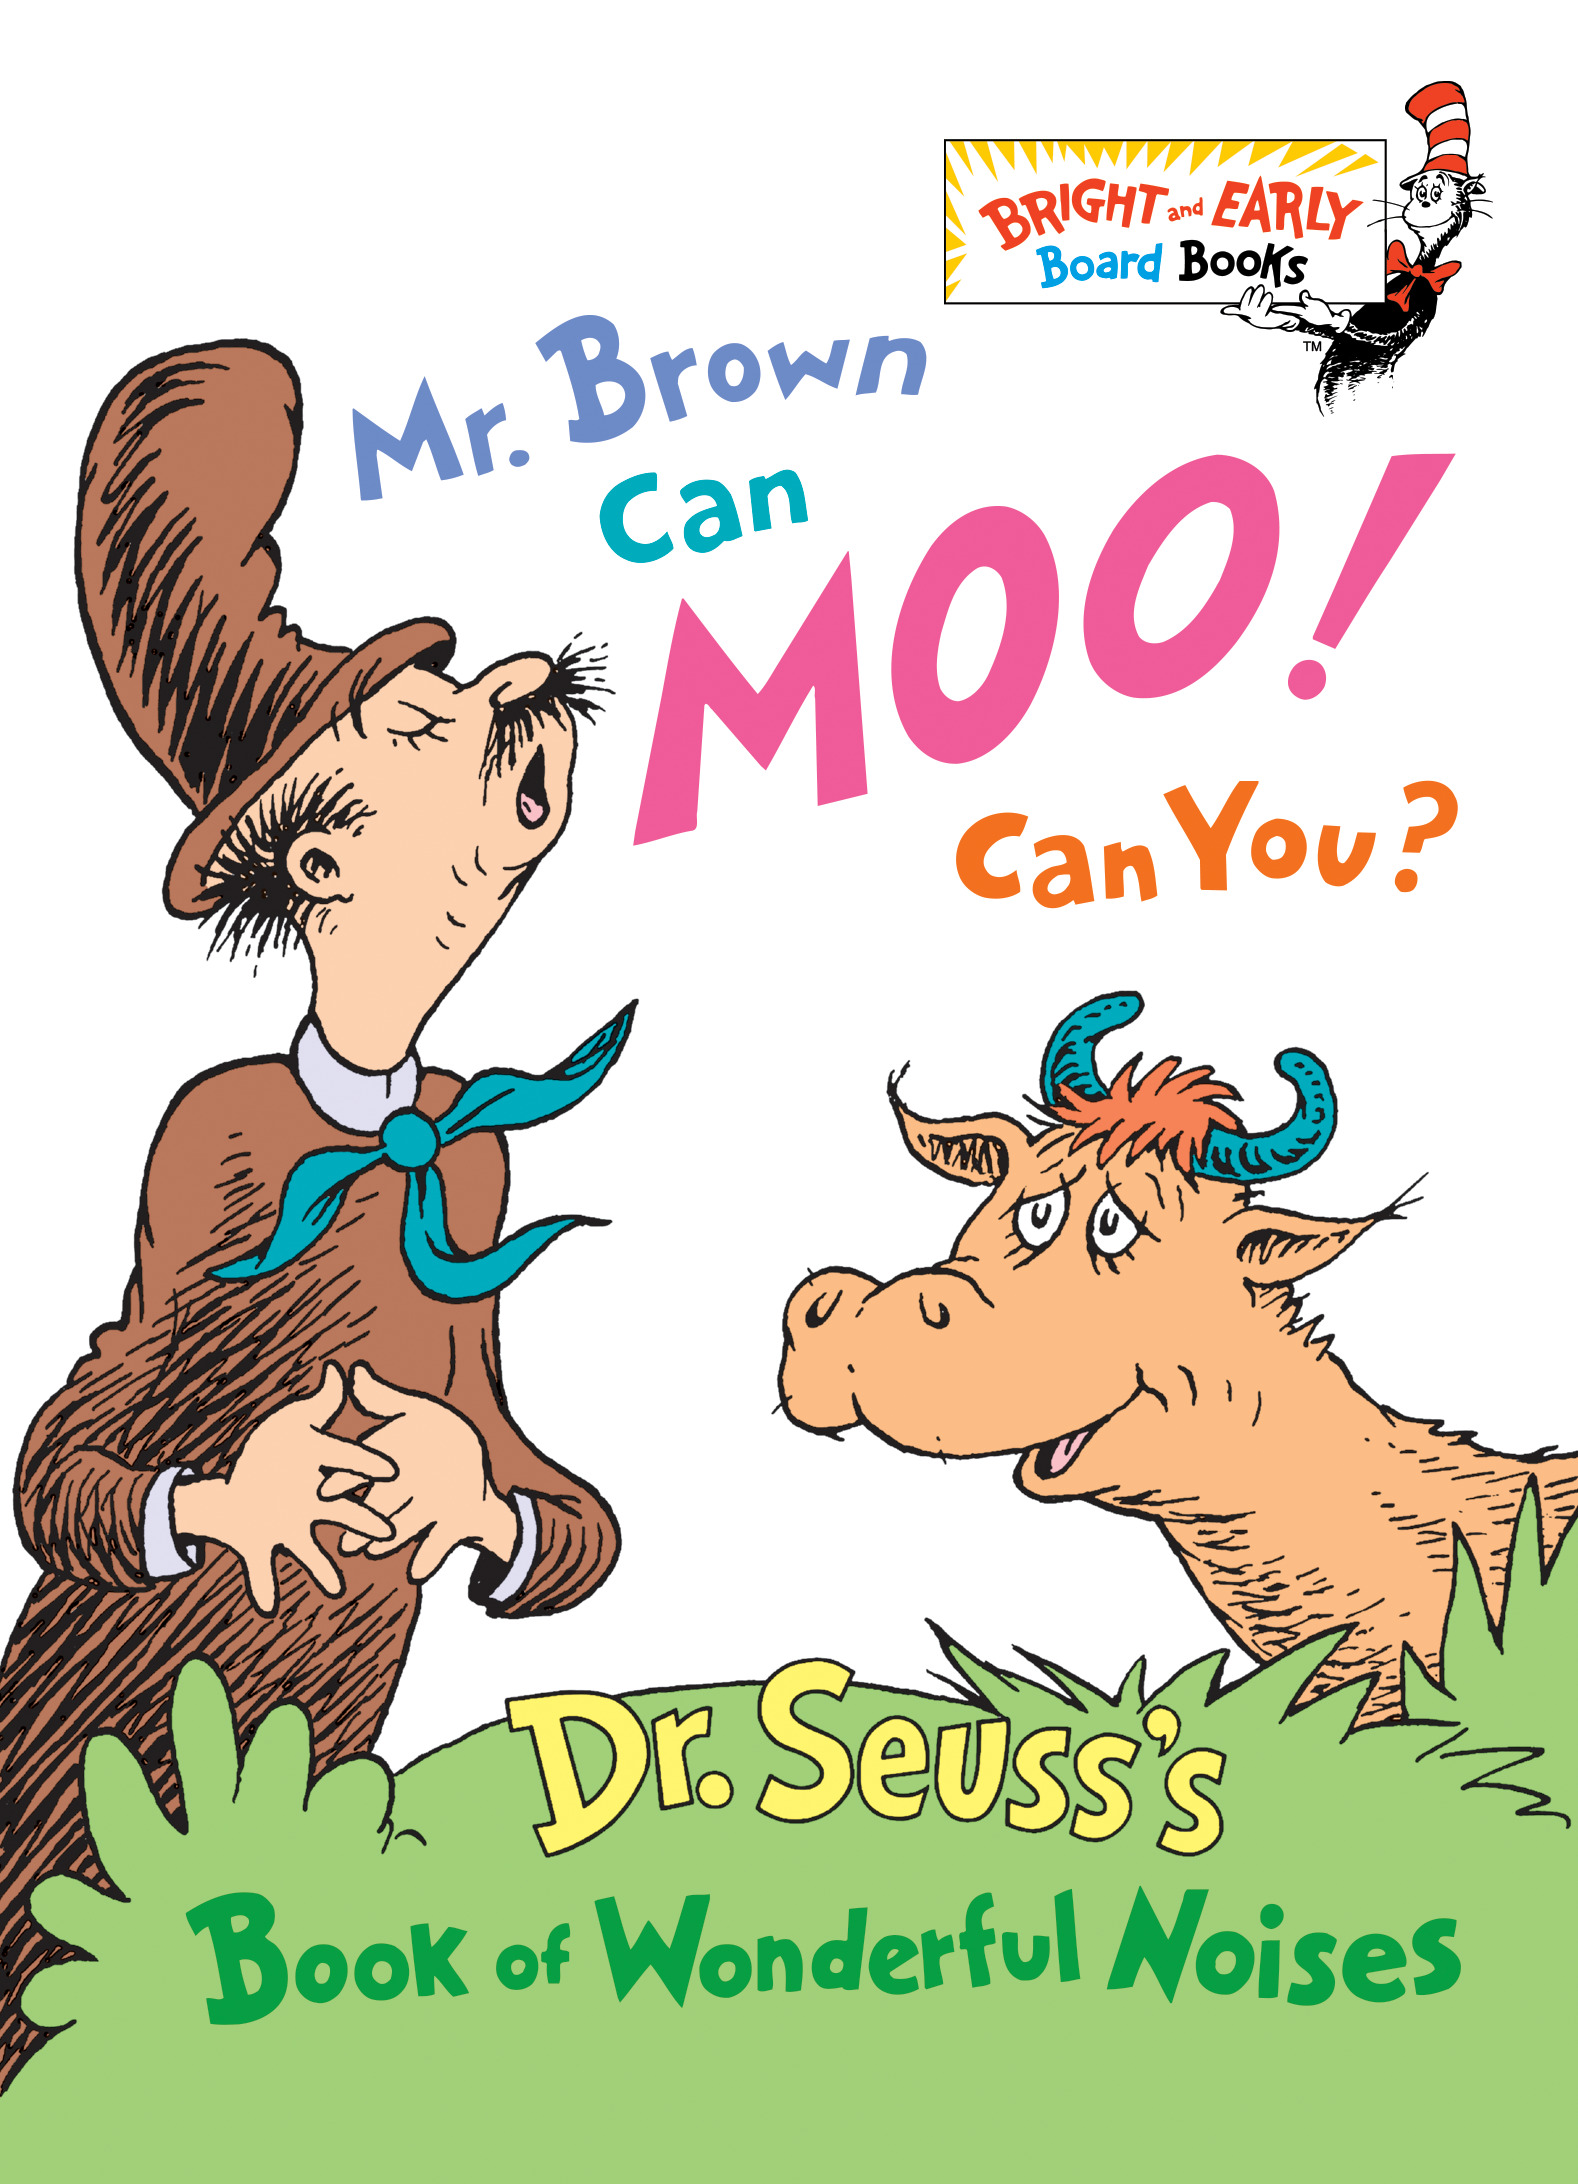 Mr. Brown Can Moo! Can You? : Dr. Seuss's Book of Wonderful Noises | Picture & board books